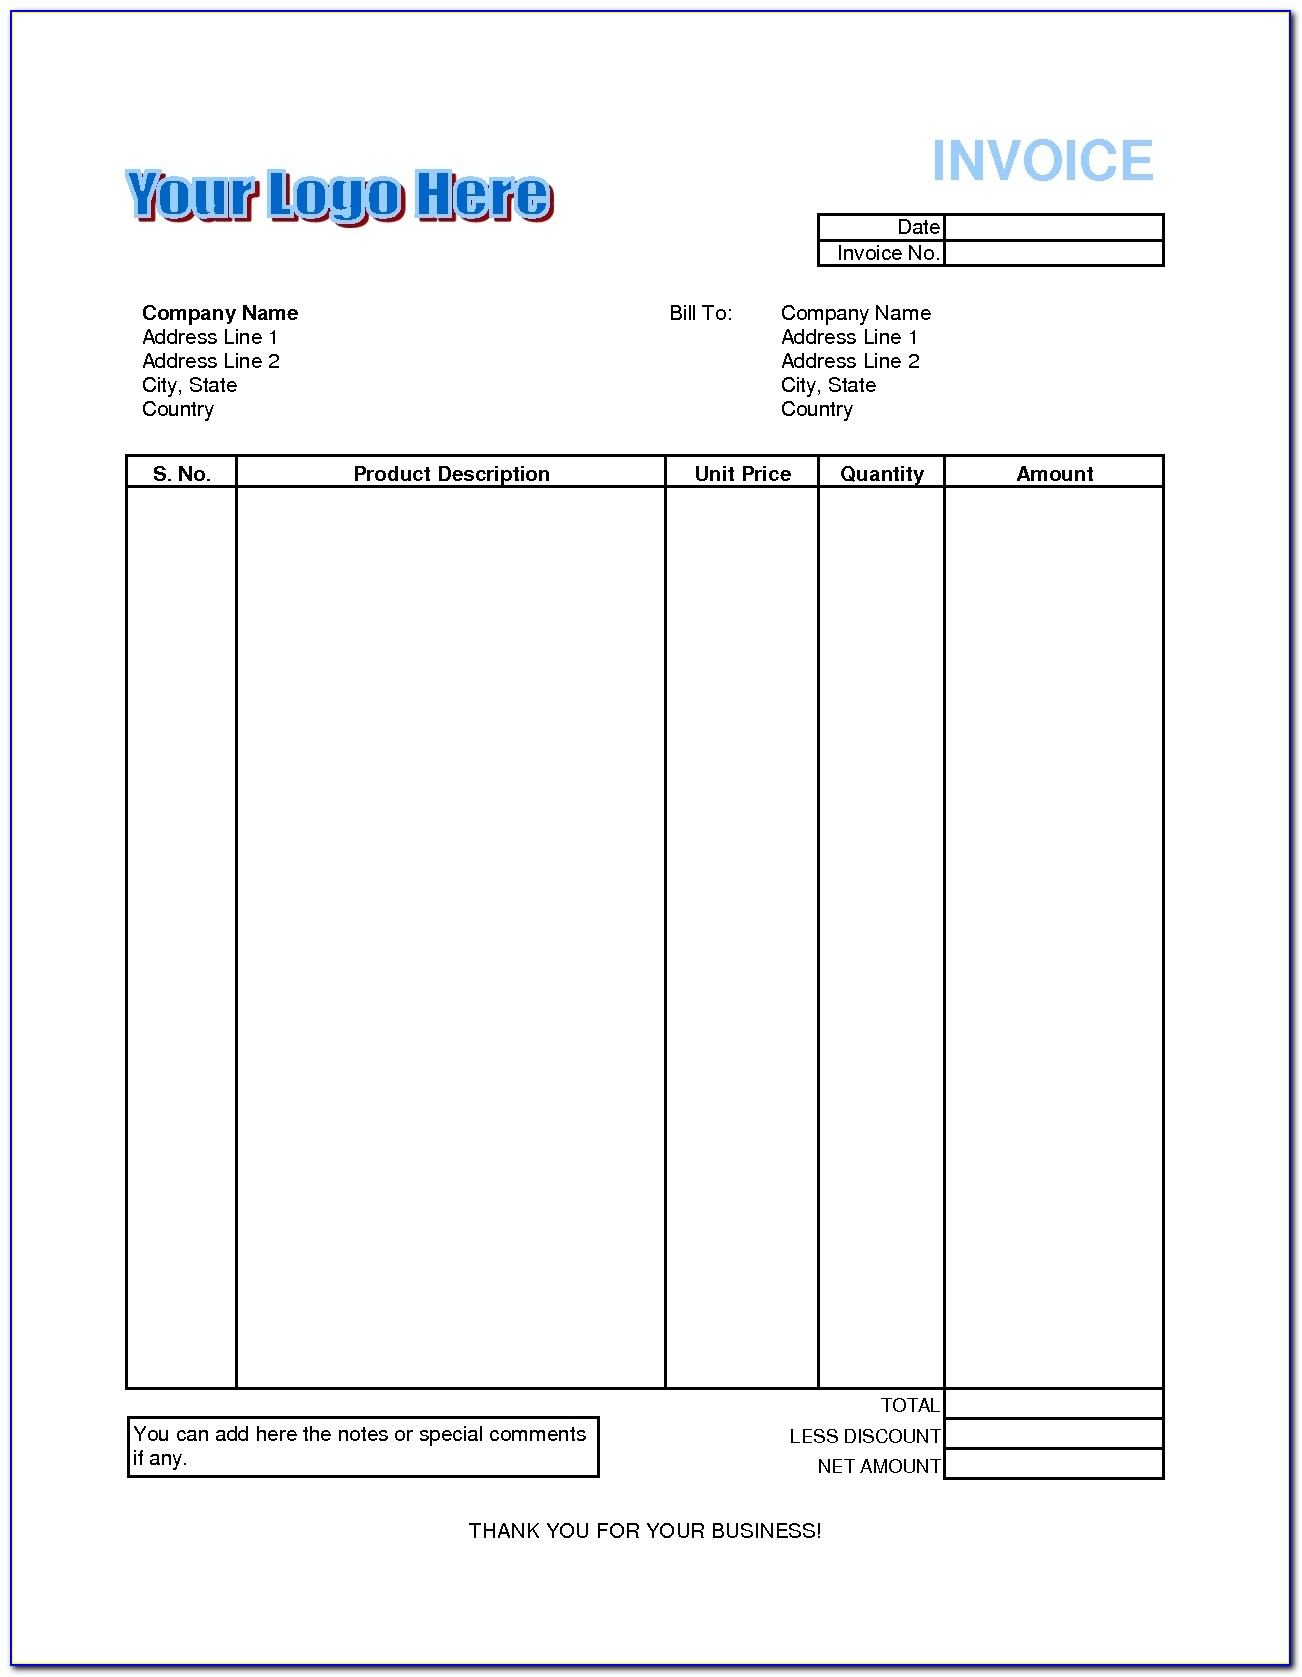 Tax Invoice Format In Excel Free Download Invoice Template Free 2016 Invoice Format Dh